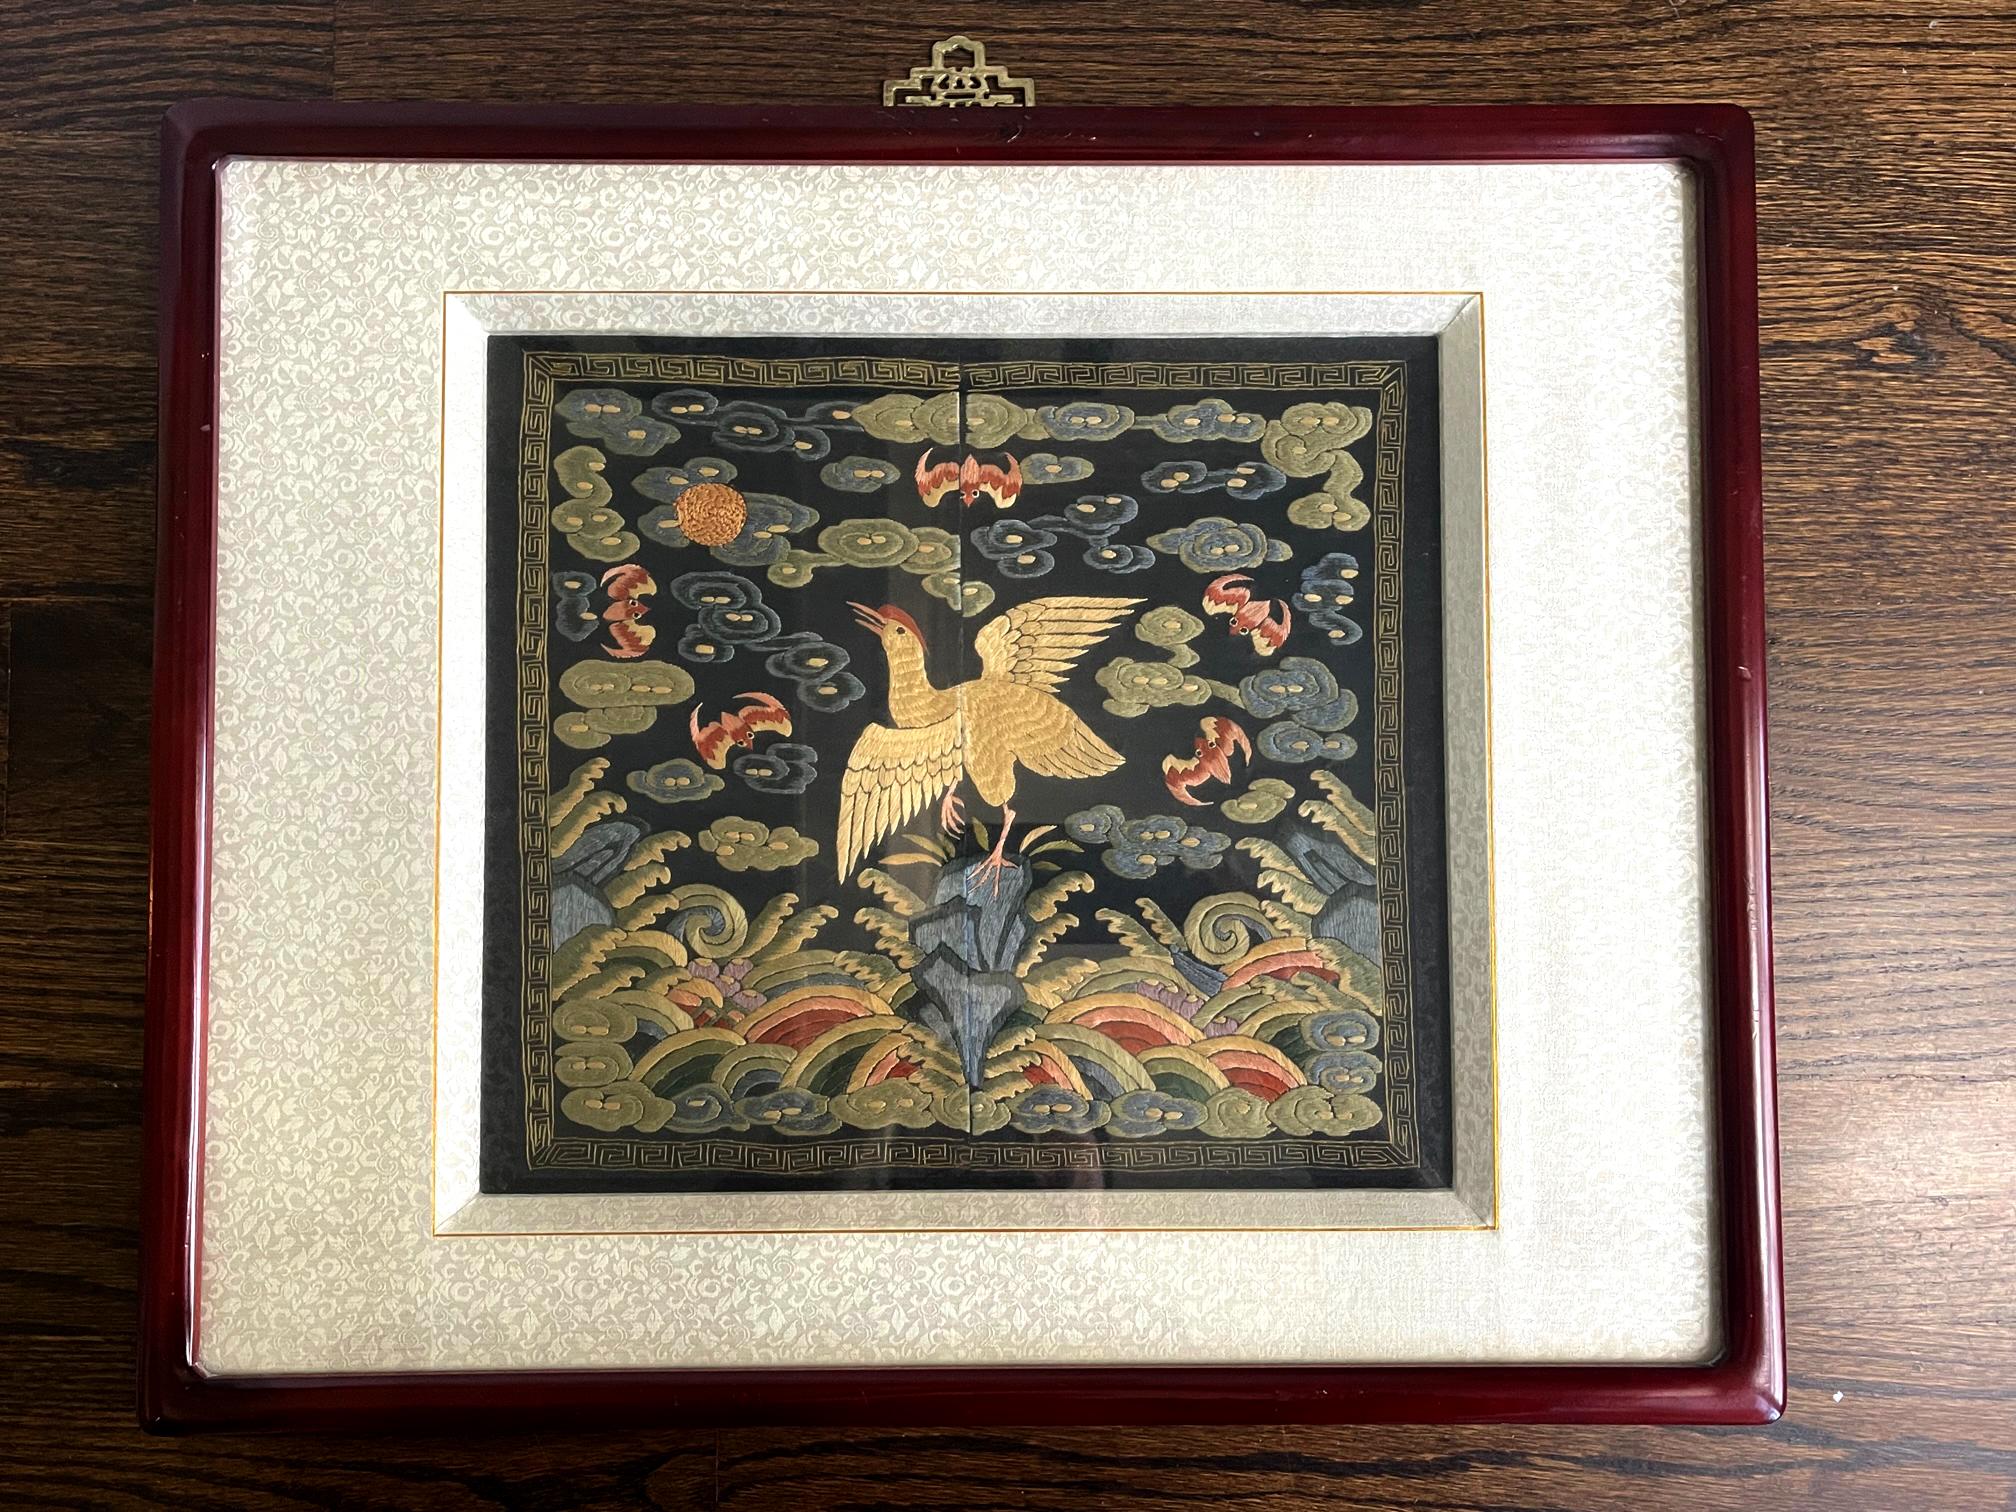 A finely embroidered silk civil rank badge panel framed in a wood frame circa late Qing dynasty 19th century. The square rank badge is known in Chinese as Buzi which was displayed in the front and back of the official robe to indicate one's rank